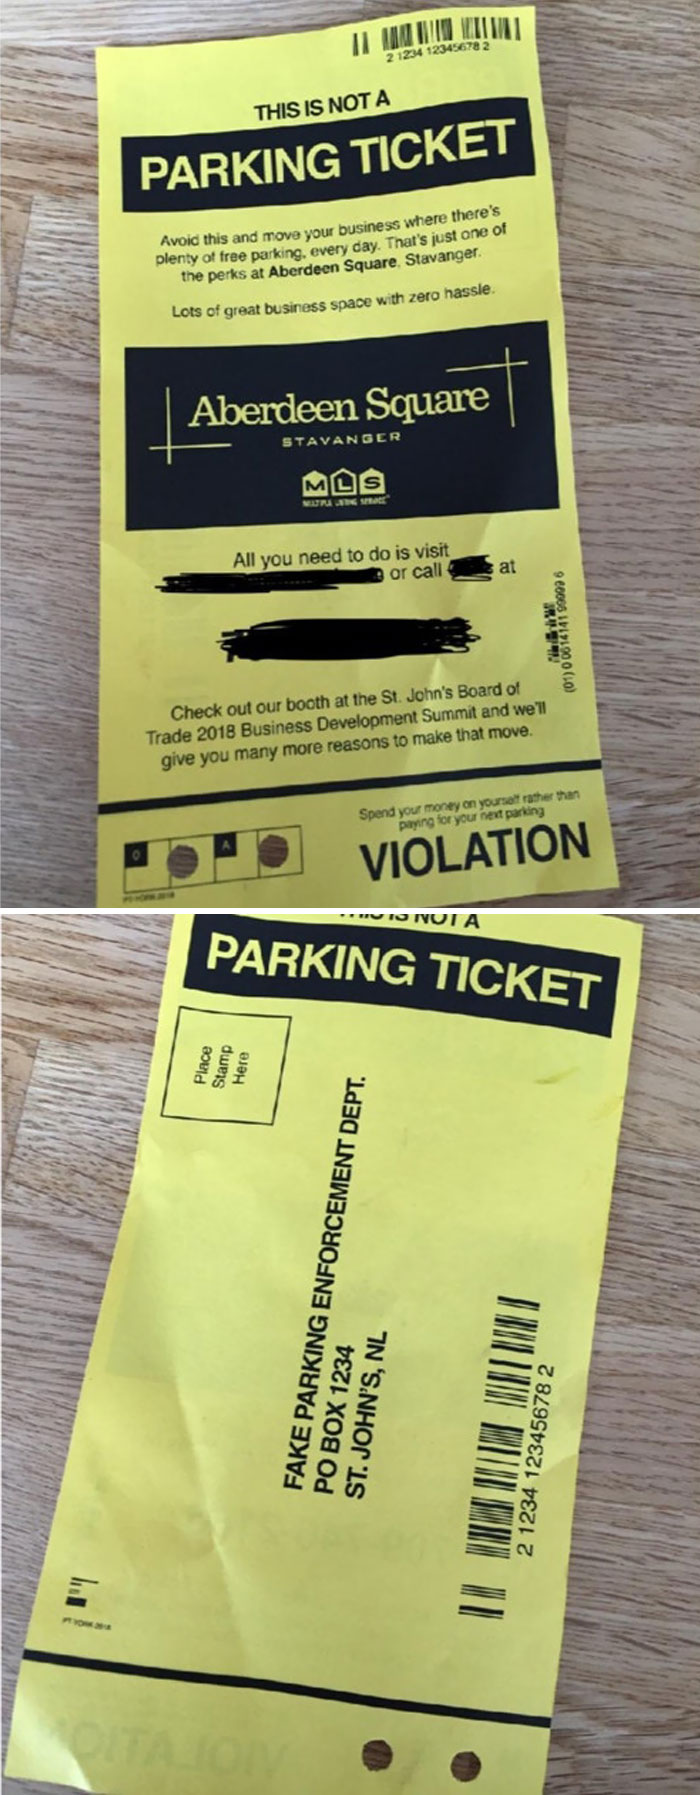 Advertising Masked As A Parking Ticket In A Parking Garage